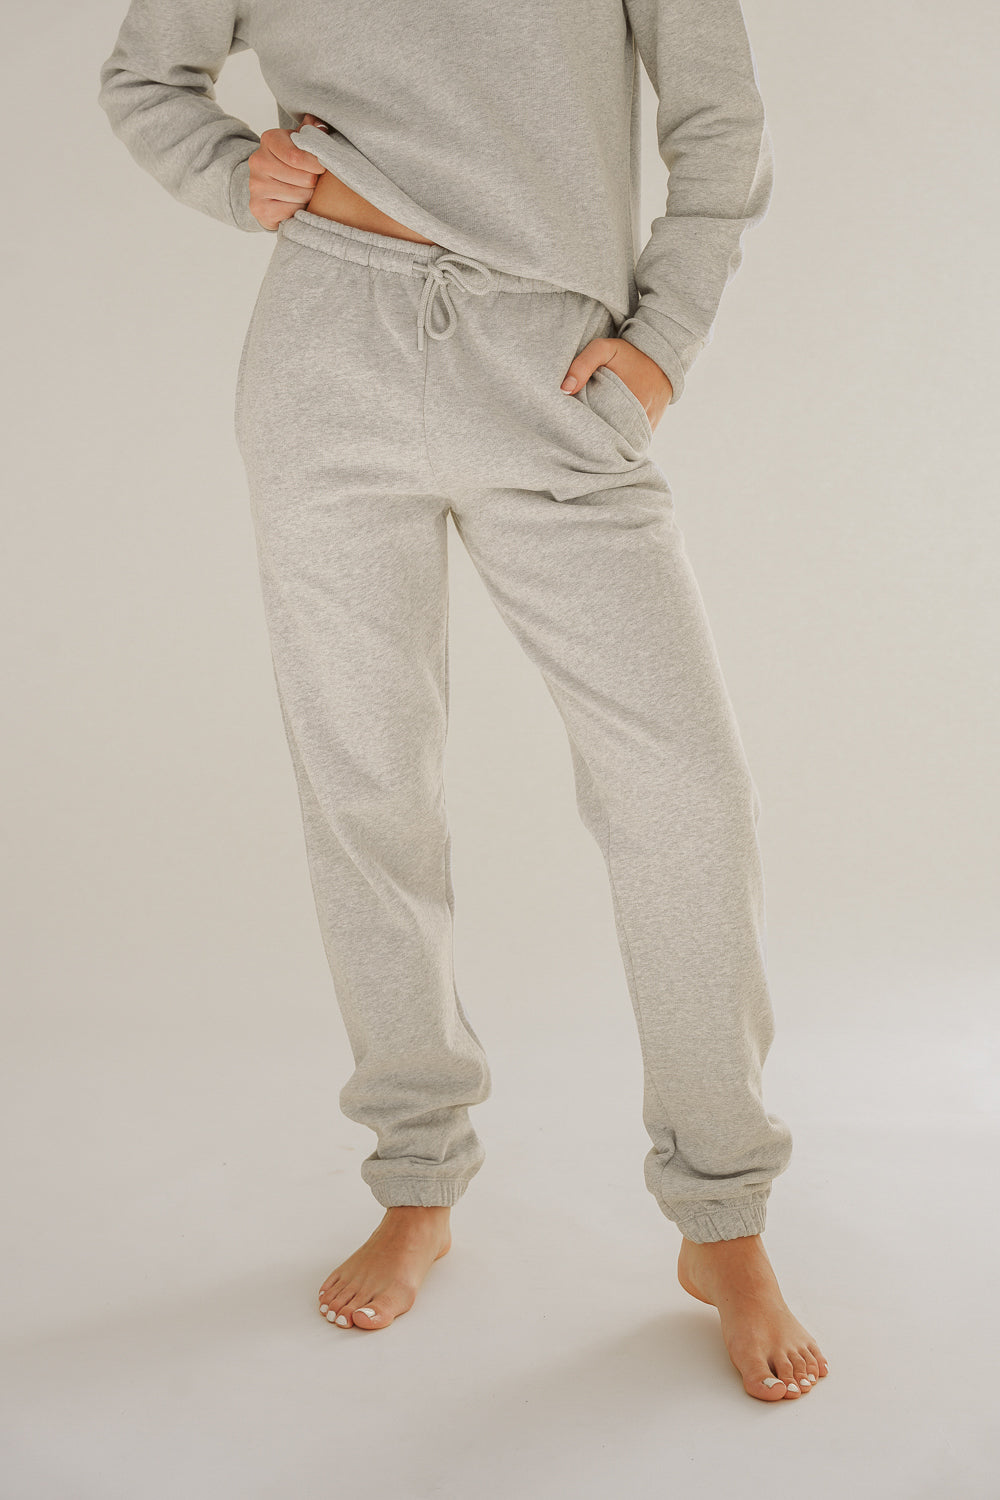 Light grey AAMY jogging pants made from 100% organic cotton by Pura Clothing